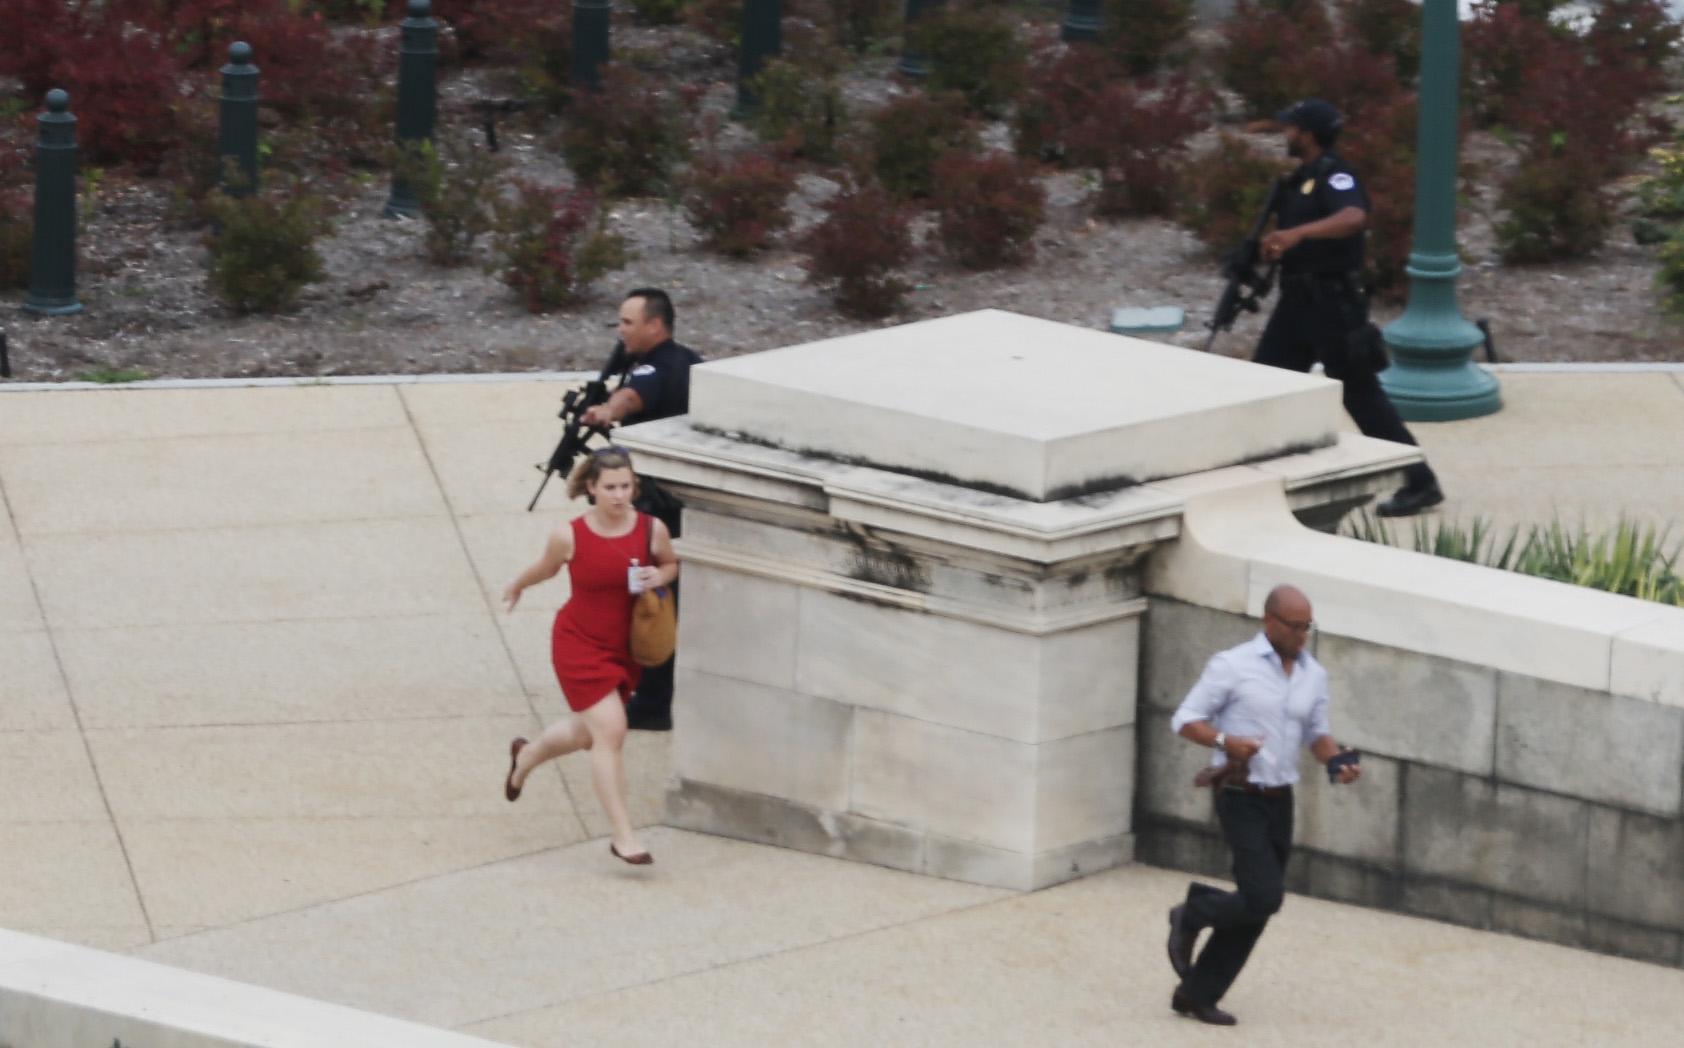 U.S. Capitol On Lockdown After Reports Of Gun Shots